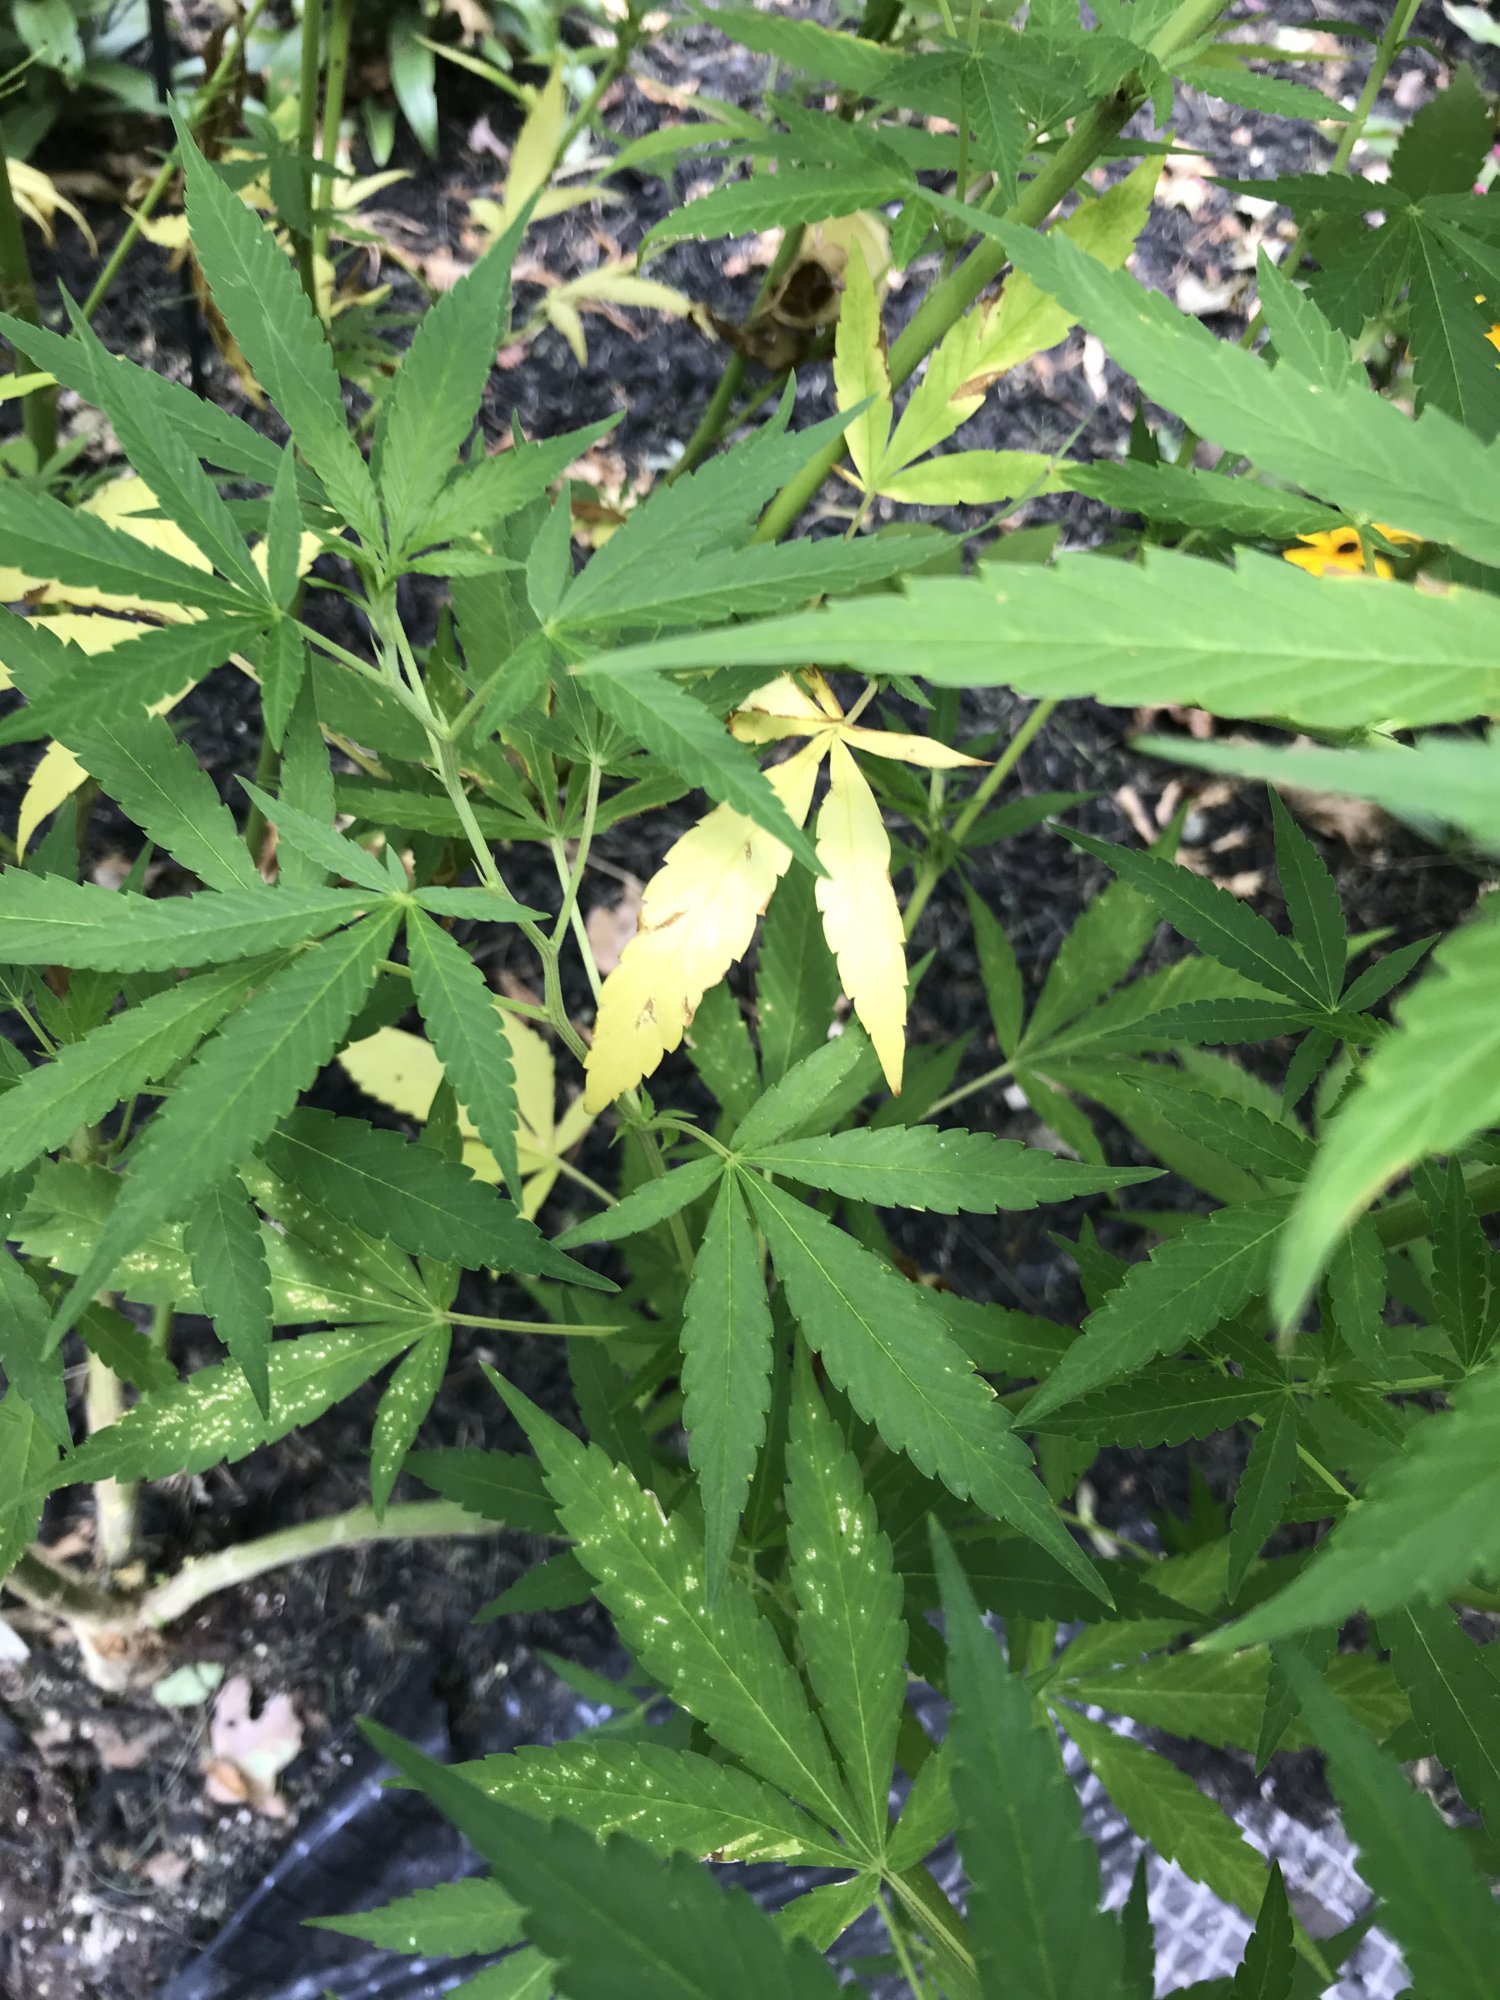 Should leaves be this yellow during flower 4